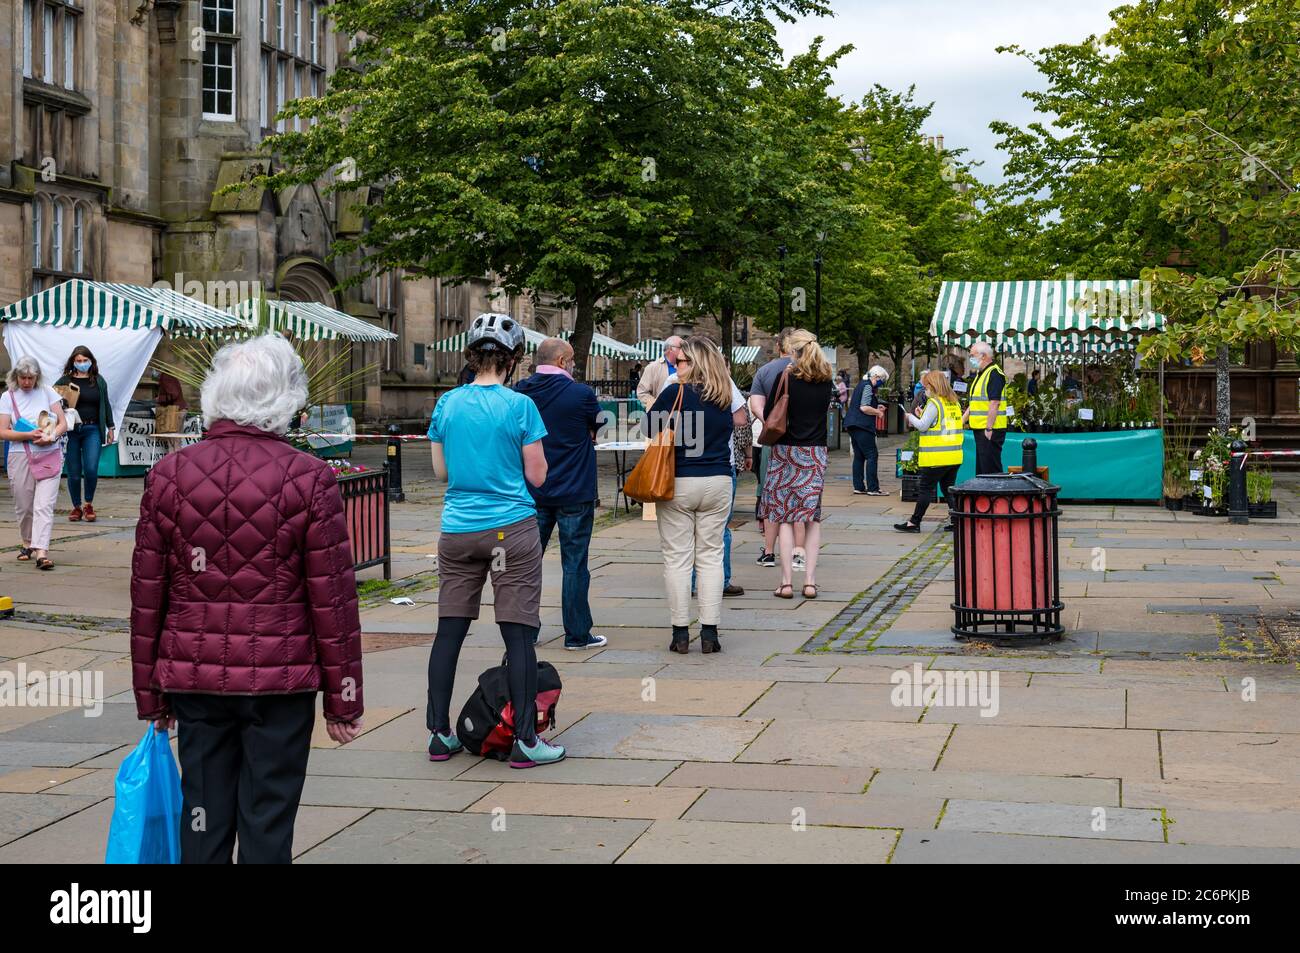 People queueing at re-opening of Farmers Market after lockdown easing during Covid-19 pandemic, Haddington, East Lothian, Scotland, UK Stock Photo